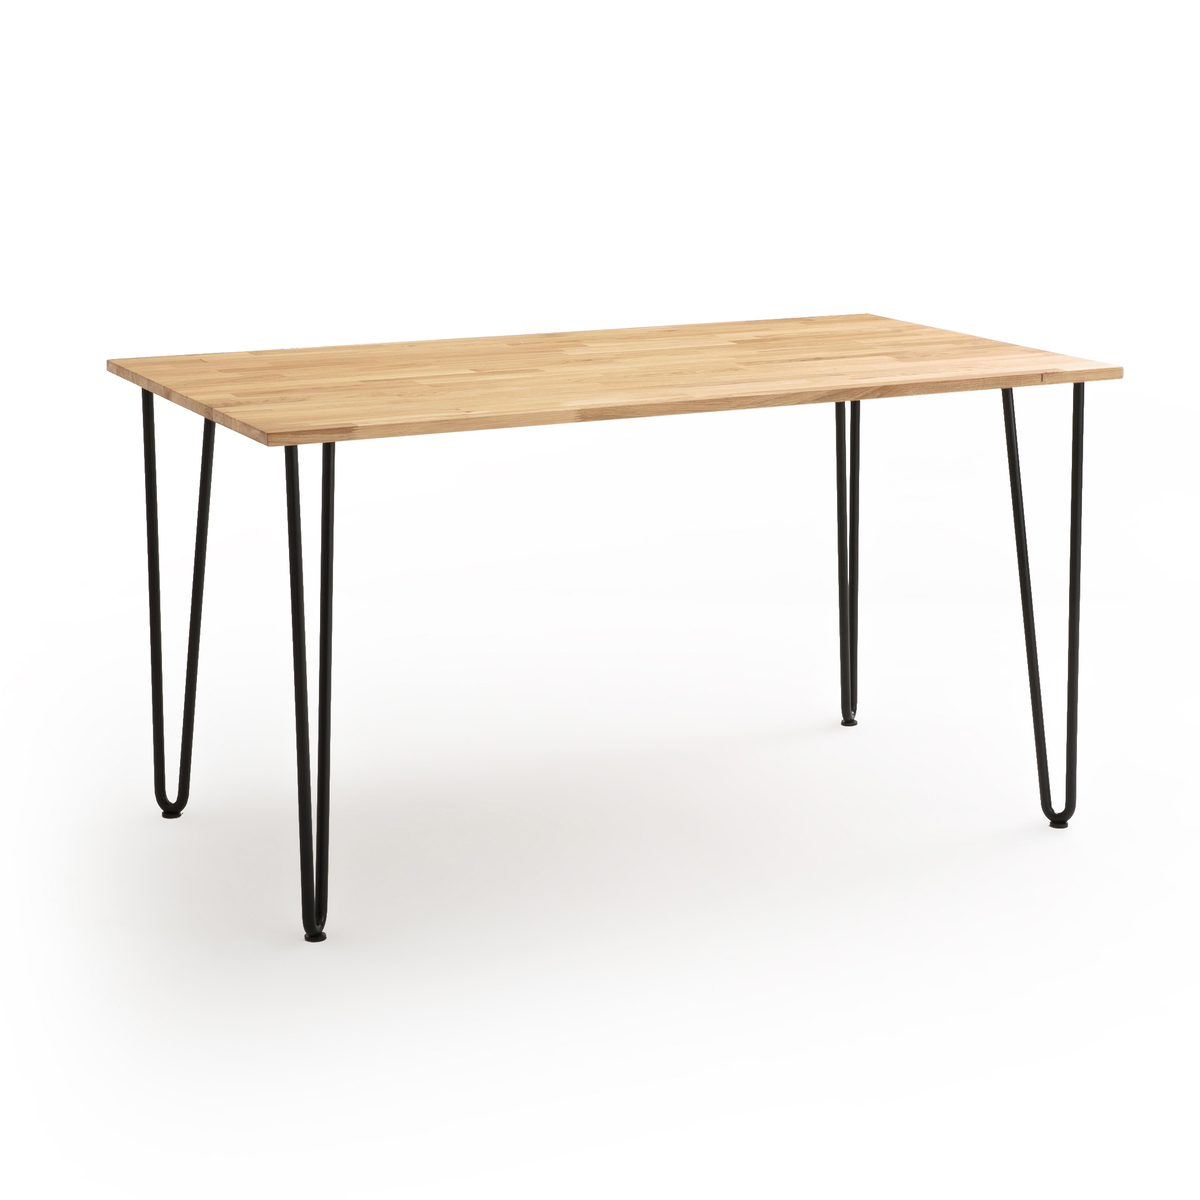 Adza Dining Table (seats 4-6) by La Redoute